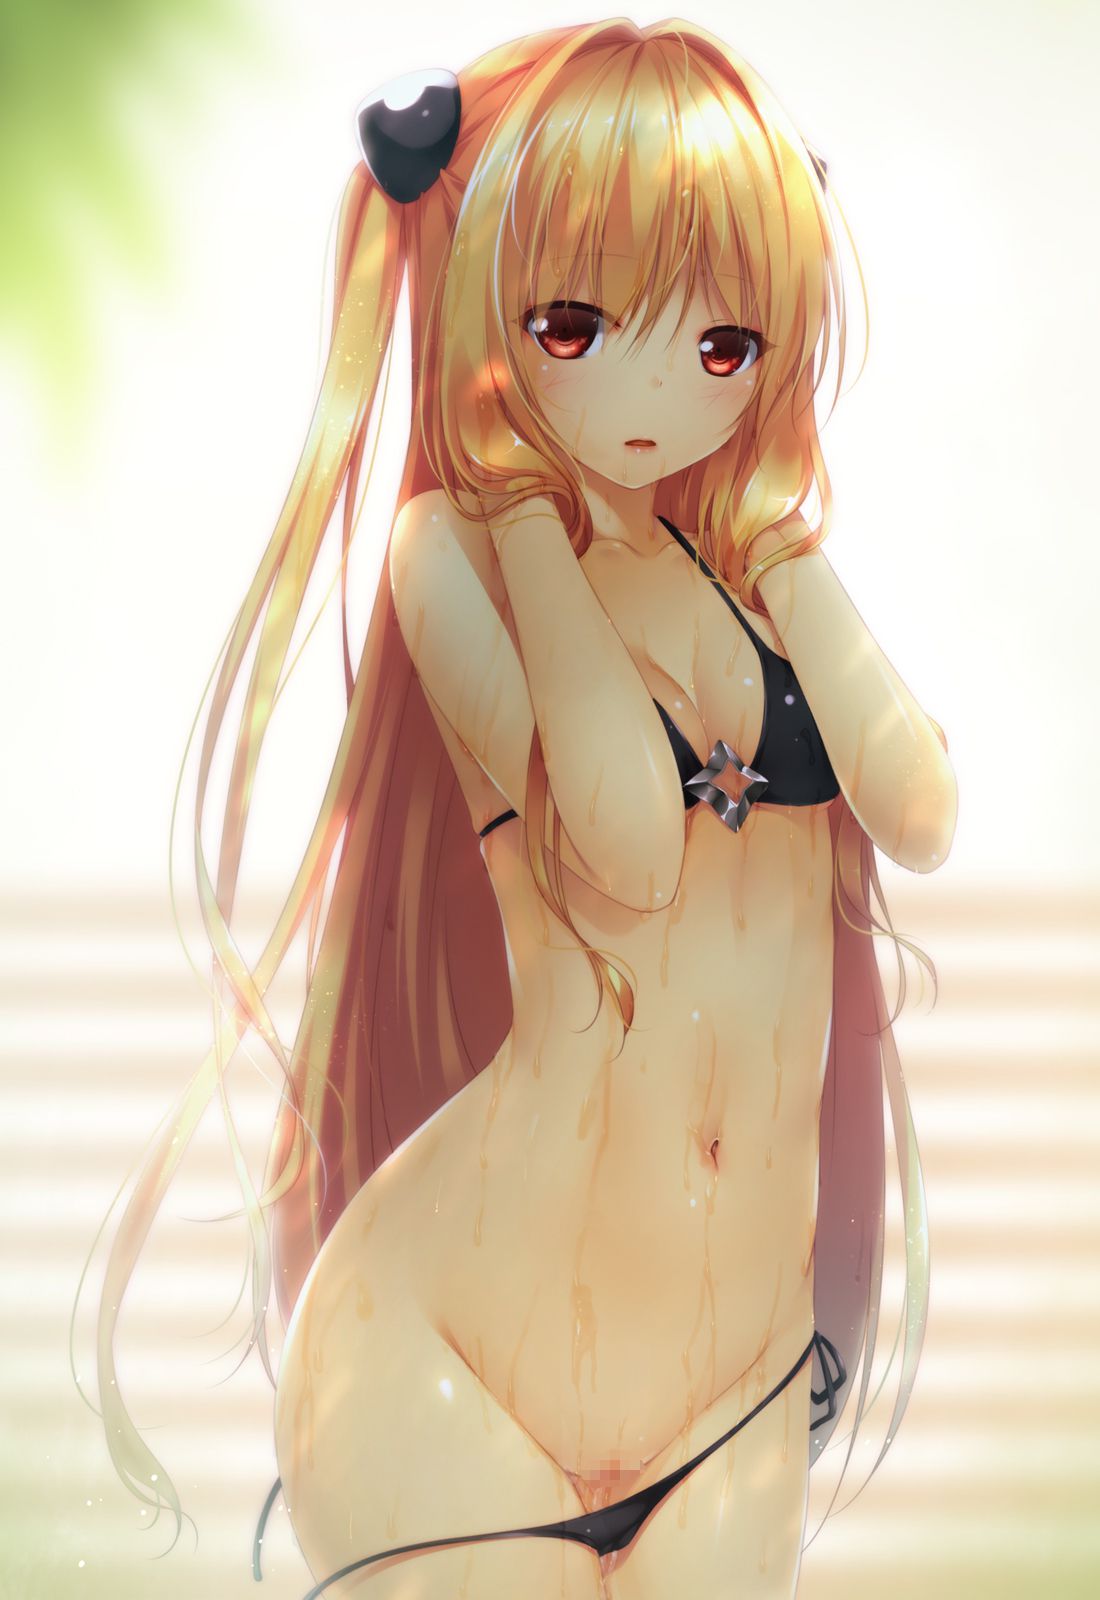 The swimsuit that wants to see the image of a swimsuit is lewd. That cloth area 3